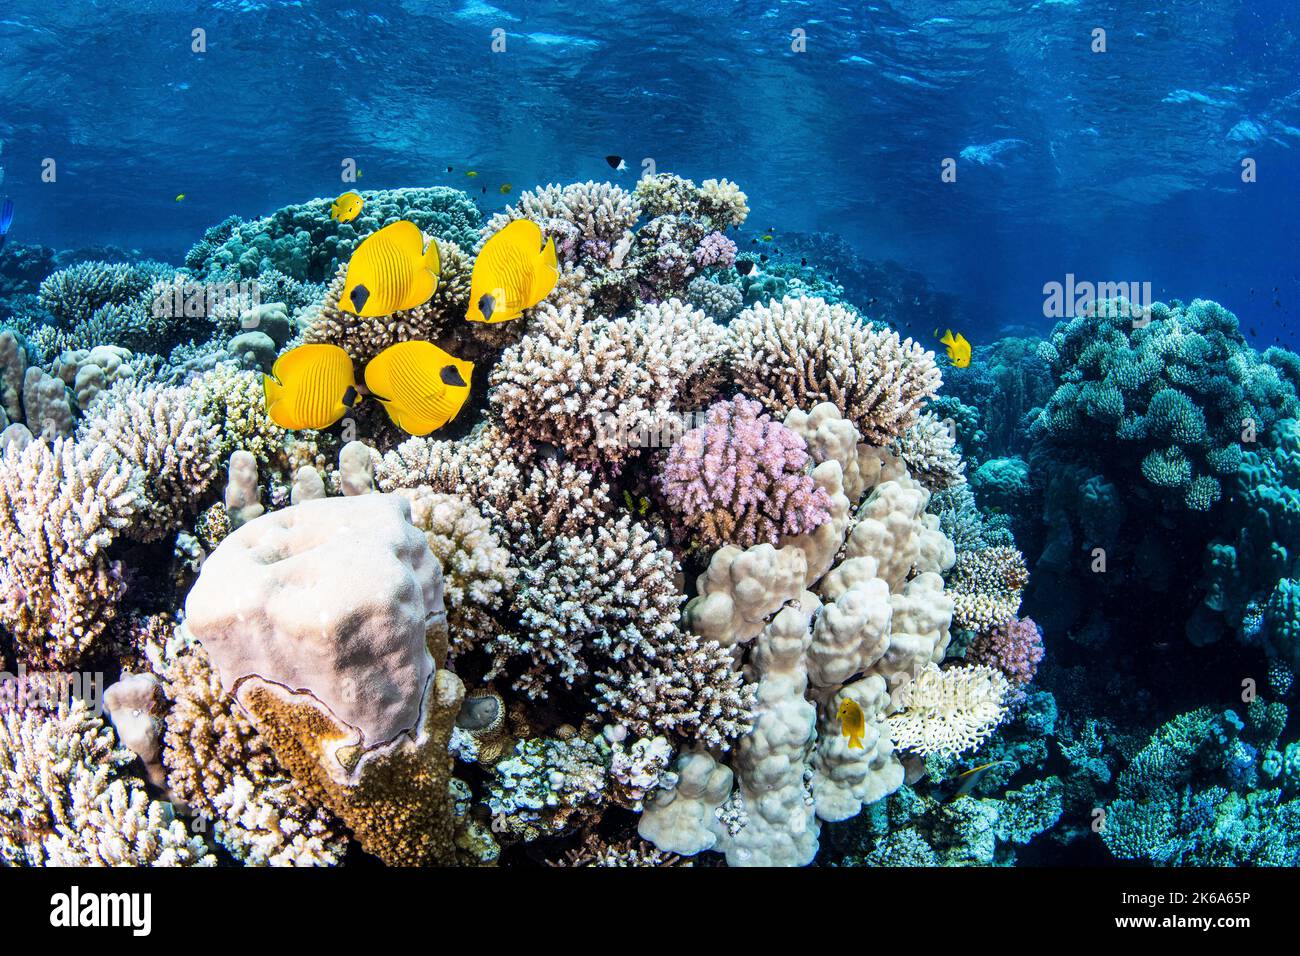 Butterflyfish dart in and out of the hard coral formations in this coral garden, Red Sea. Stock Photo